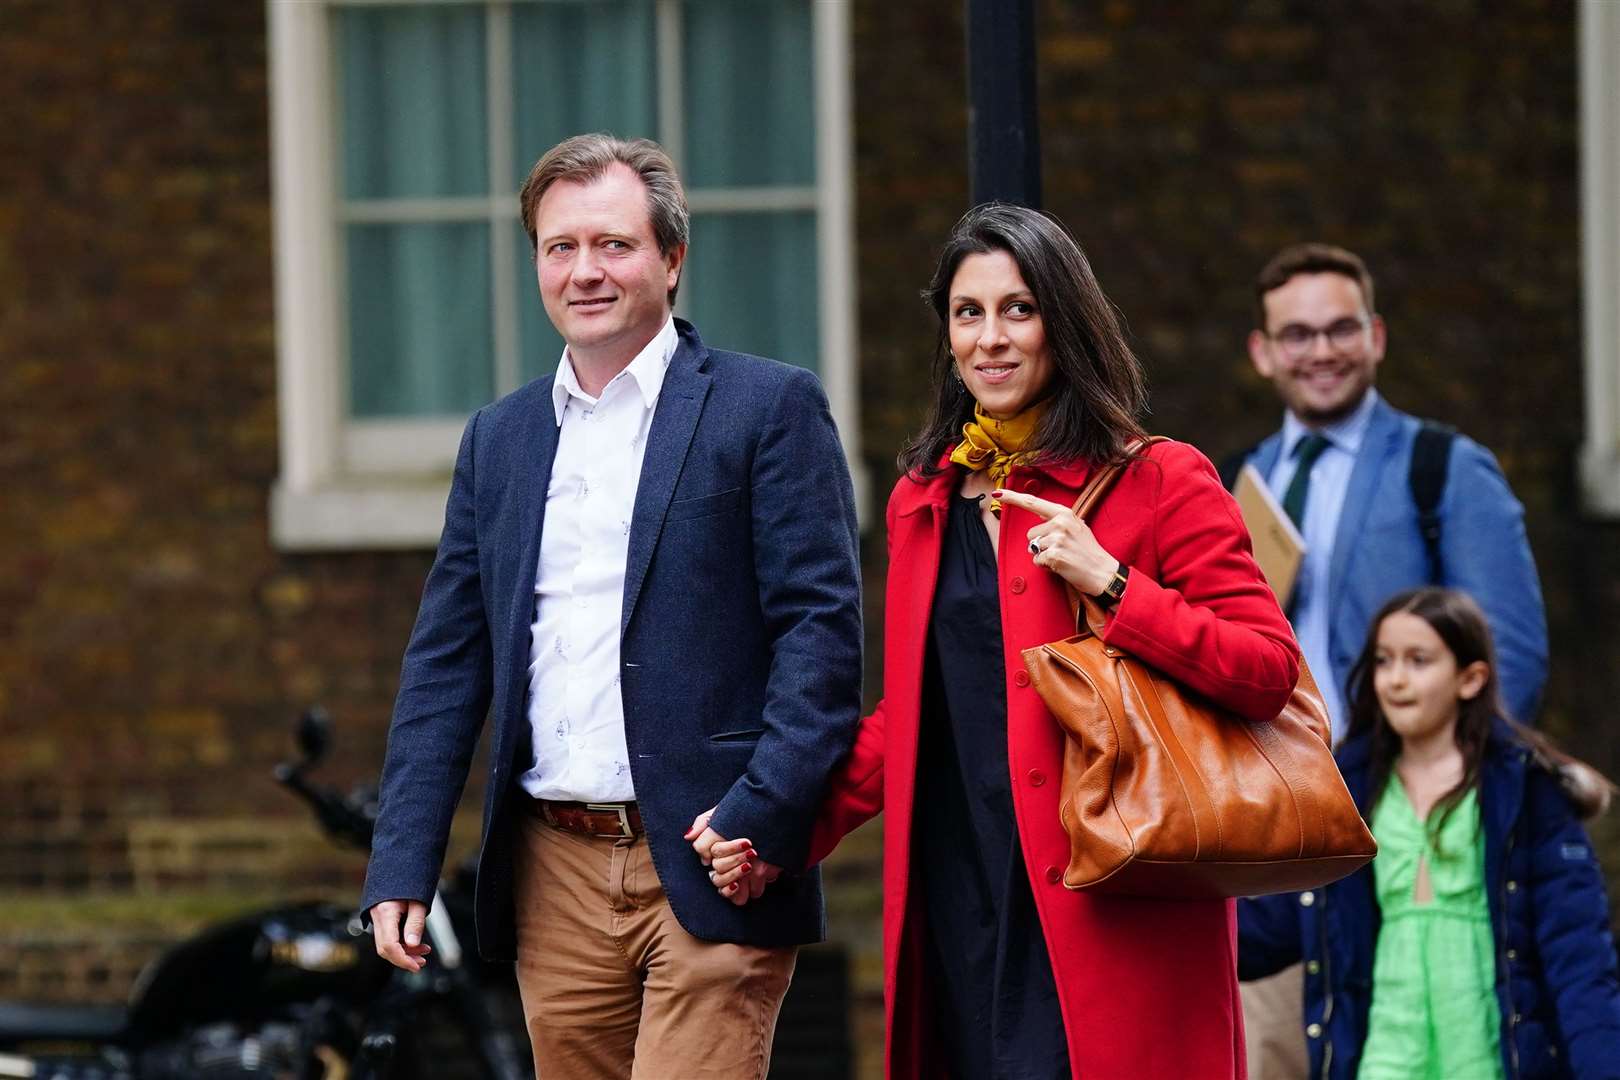 Nazanin Zaghari-Ratcliffe with her husband Richard Ratcliffe and daughter Gabriella arriving in Downing Street (Victoria Jones/PA)